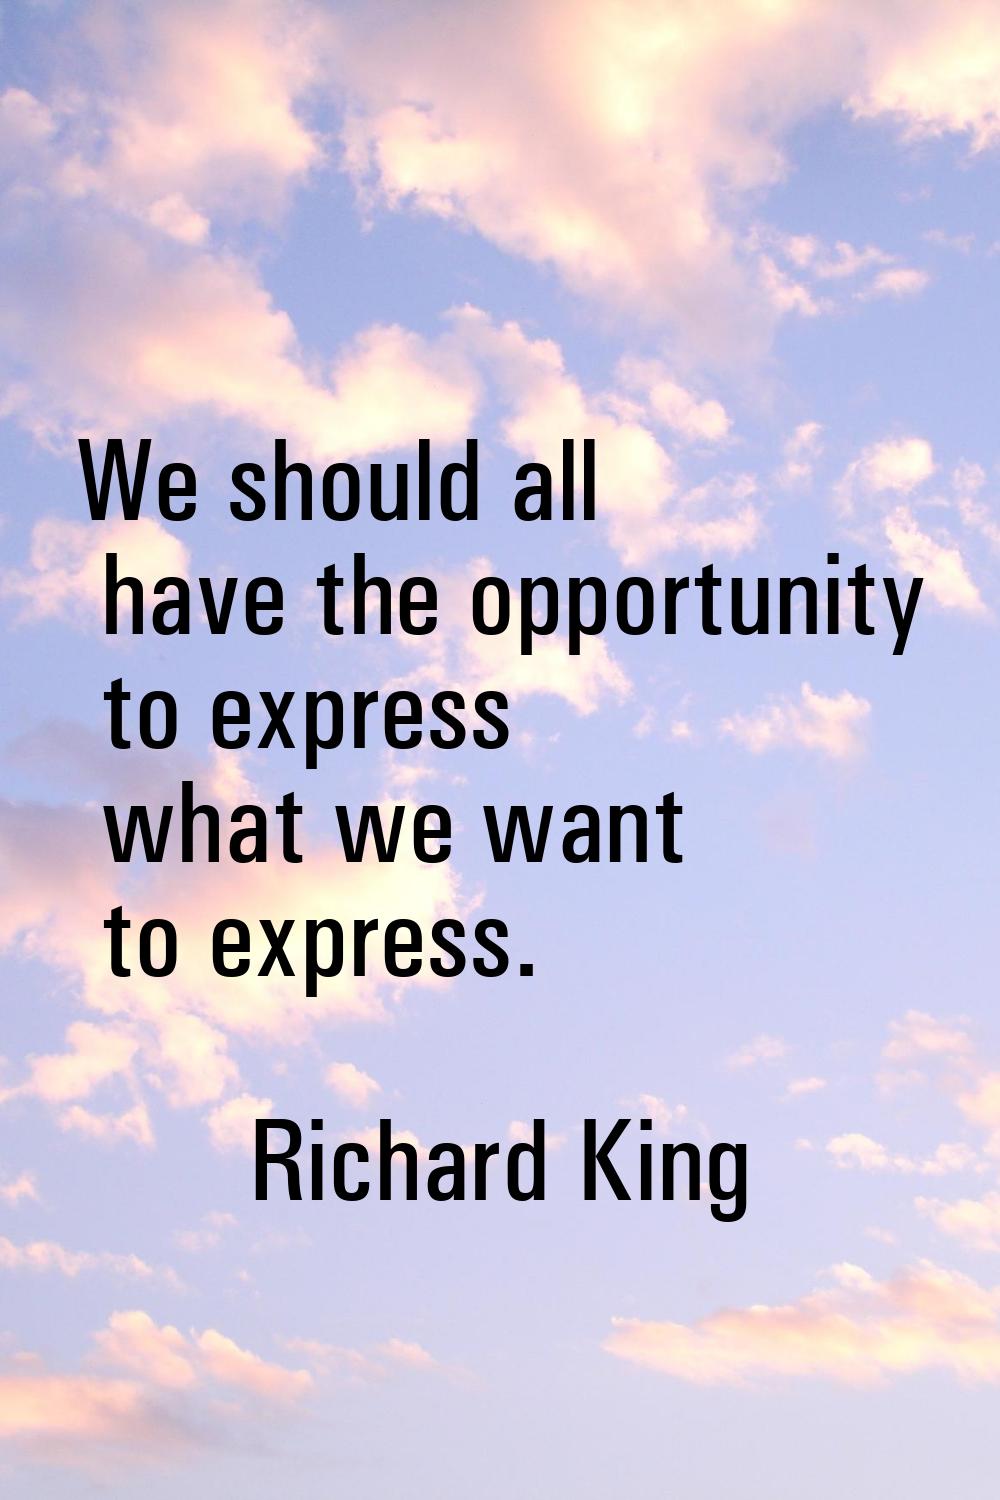 We should all have the opportunity to express what we want to express.